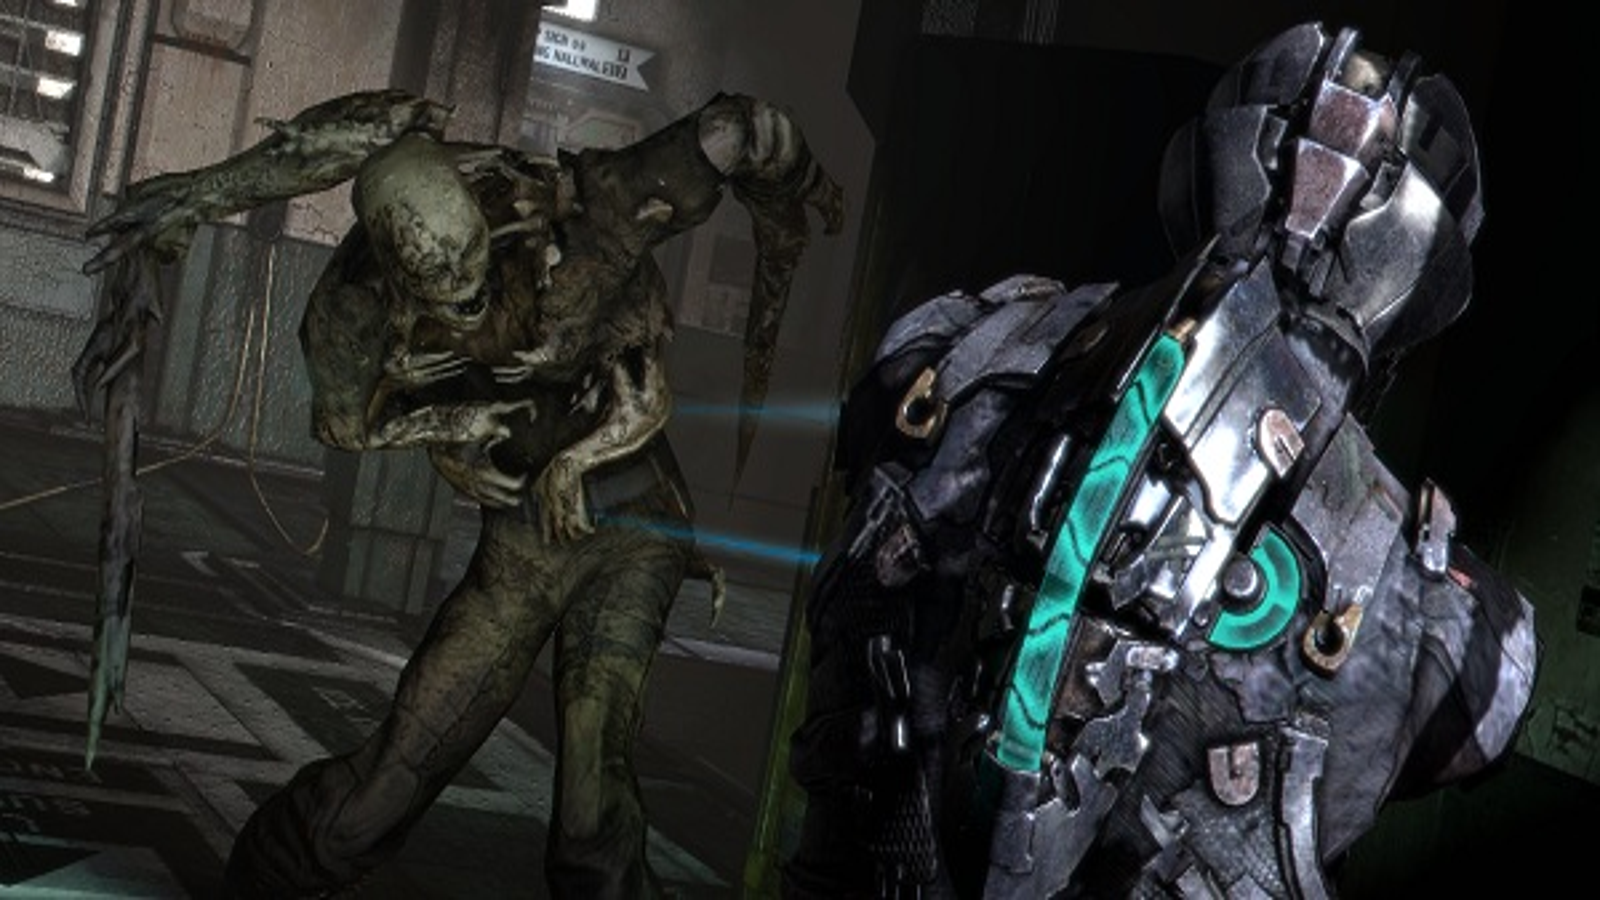 Dead Space' preview: back from the dead